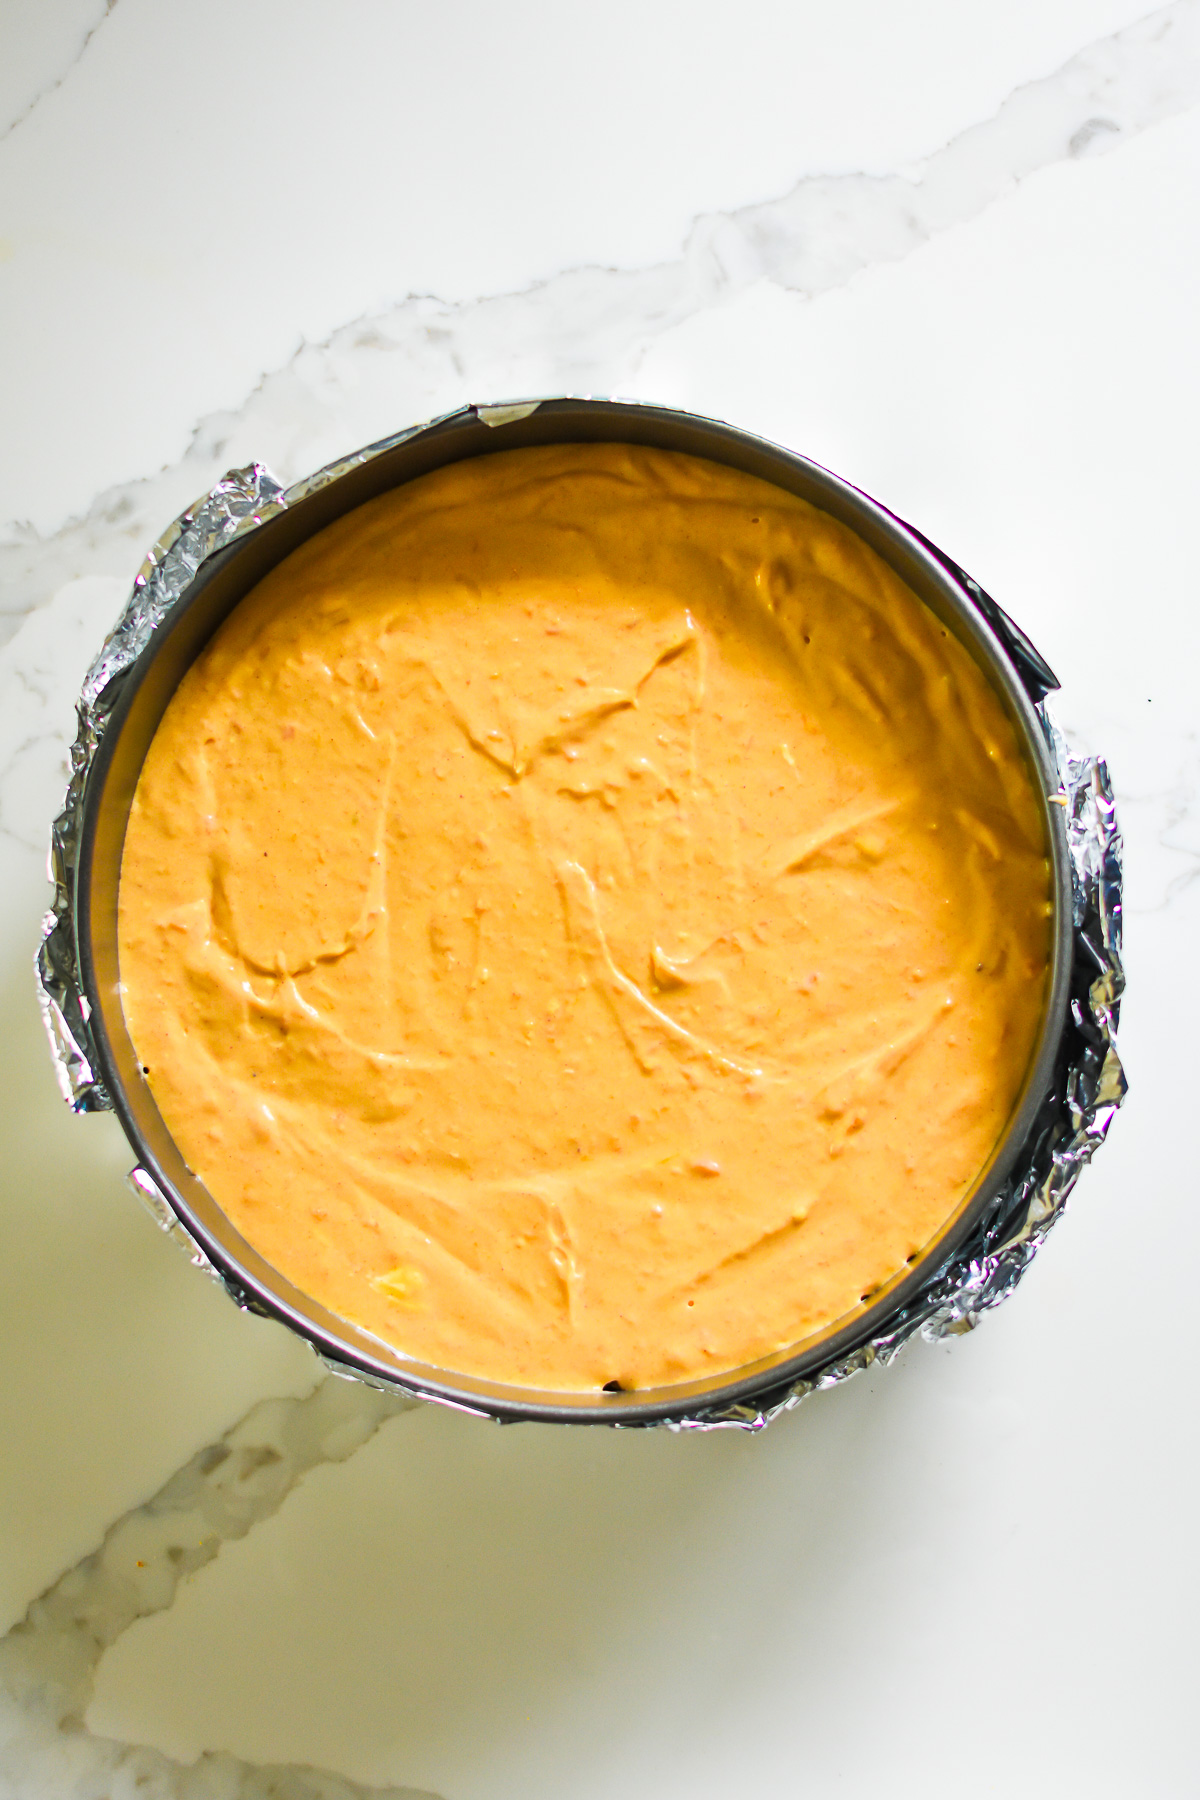 unbaked sweet potato pie cheesecake in foil wrapped springform pan.